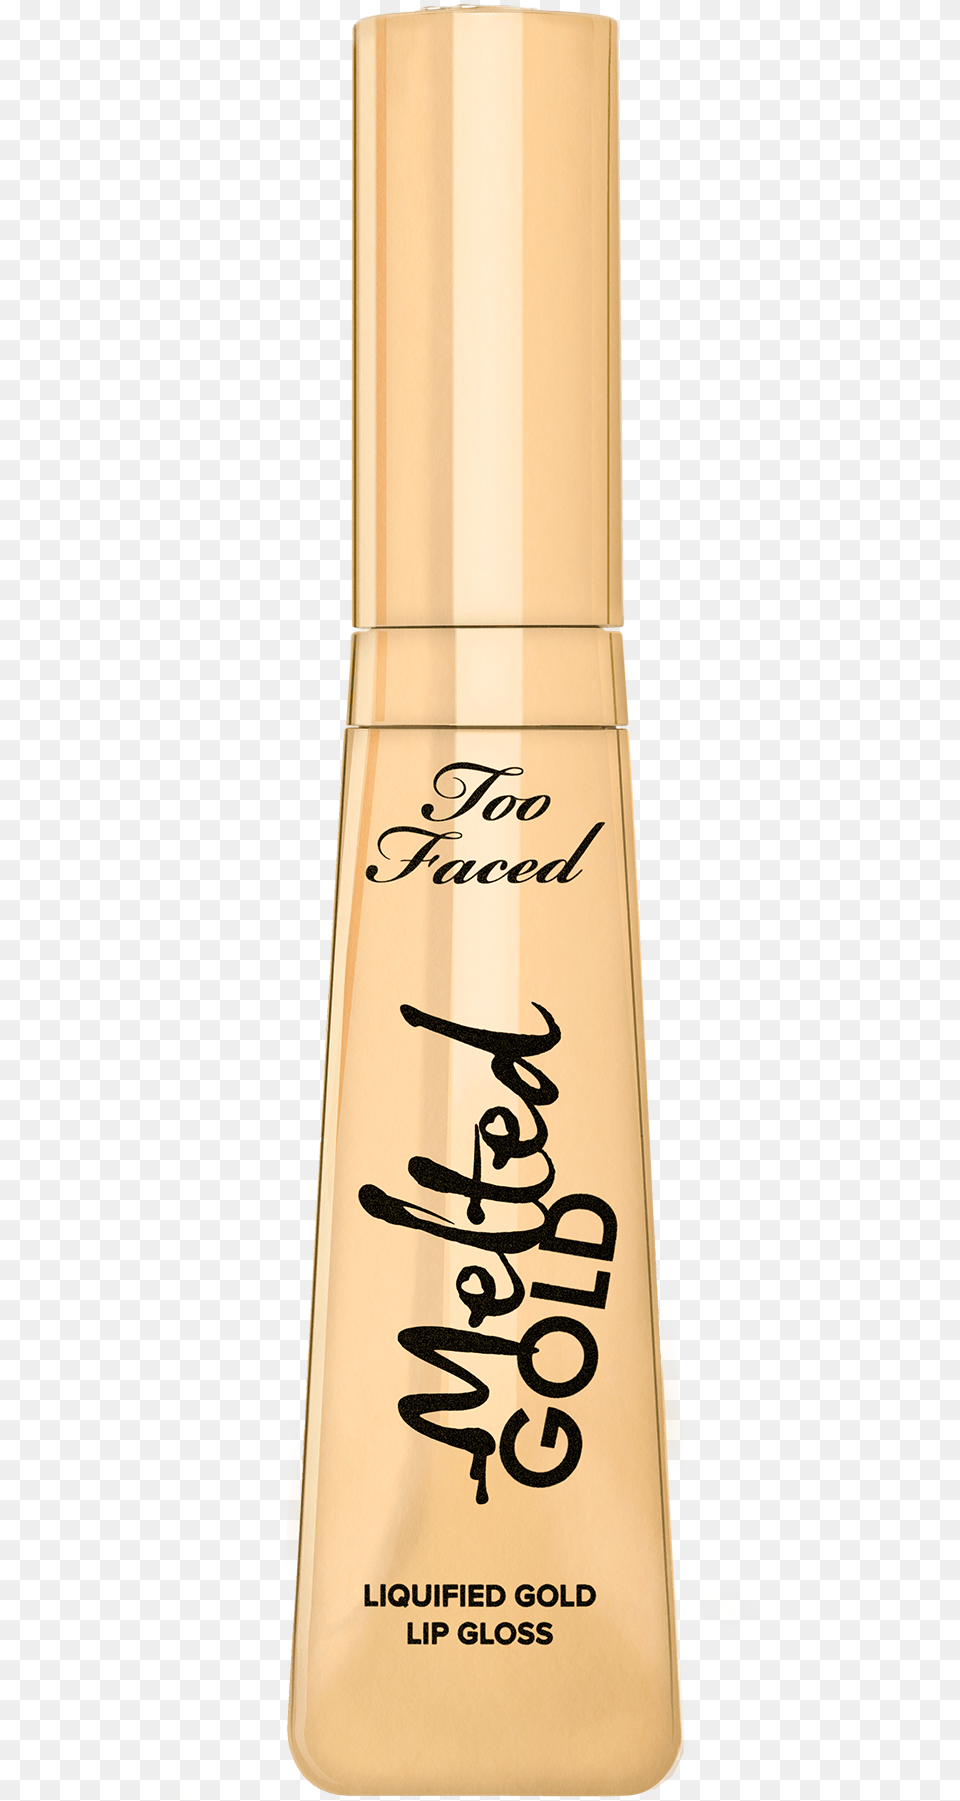 Liquified Melted Gold Lips Mascara, Cosmetics, Bottle Free Png